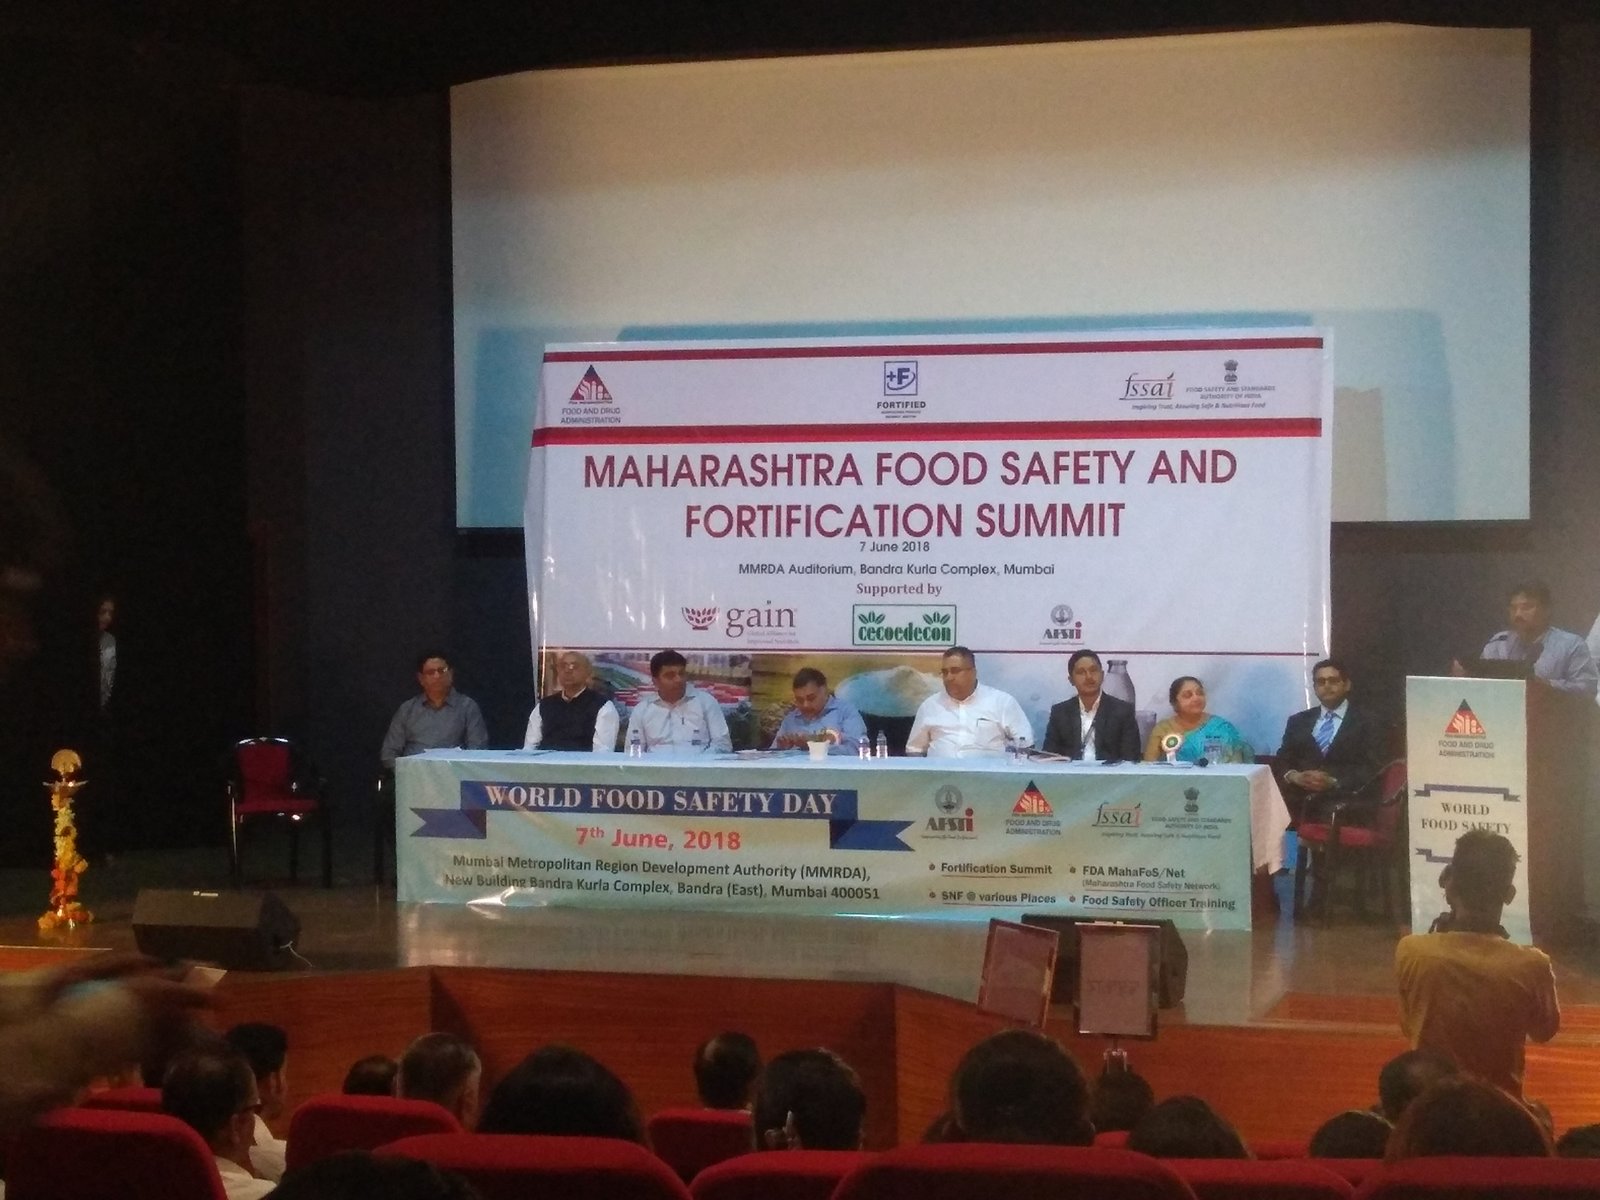 AFST India organizes Food Safety and Fortification Summit on the occasion of World Food Safety Day